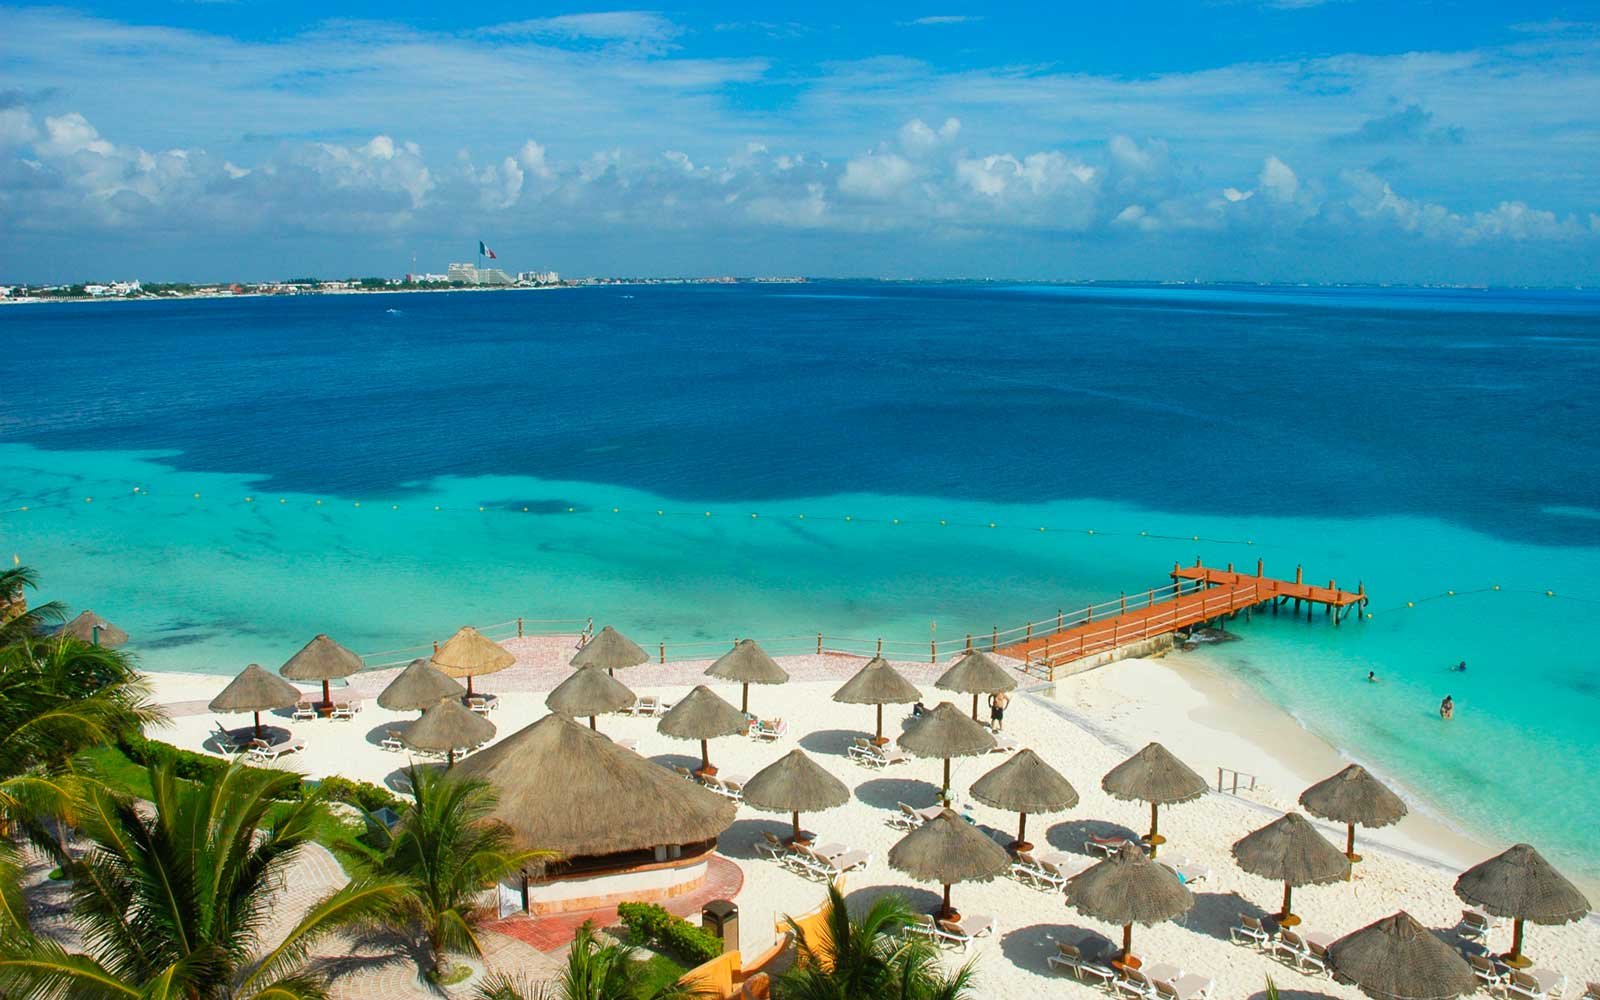 Austin to Cancun Mexico $234 RT Nonstop Airfares on American Airlines BE (Travel August - September 2022)